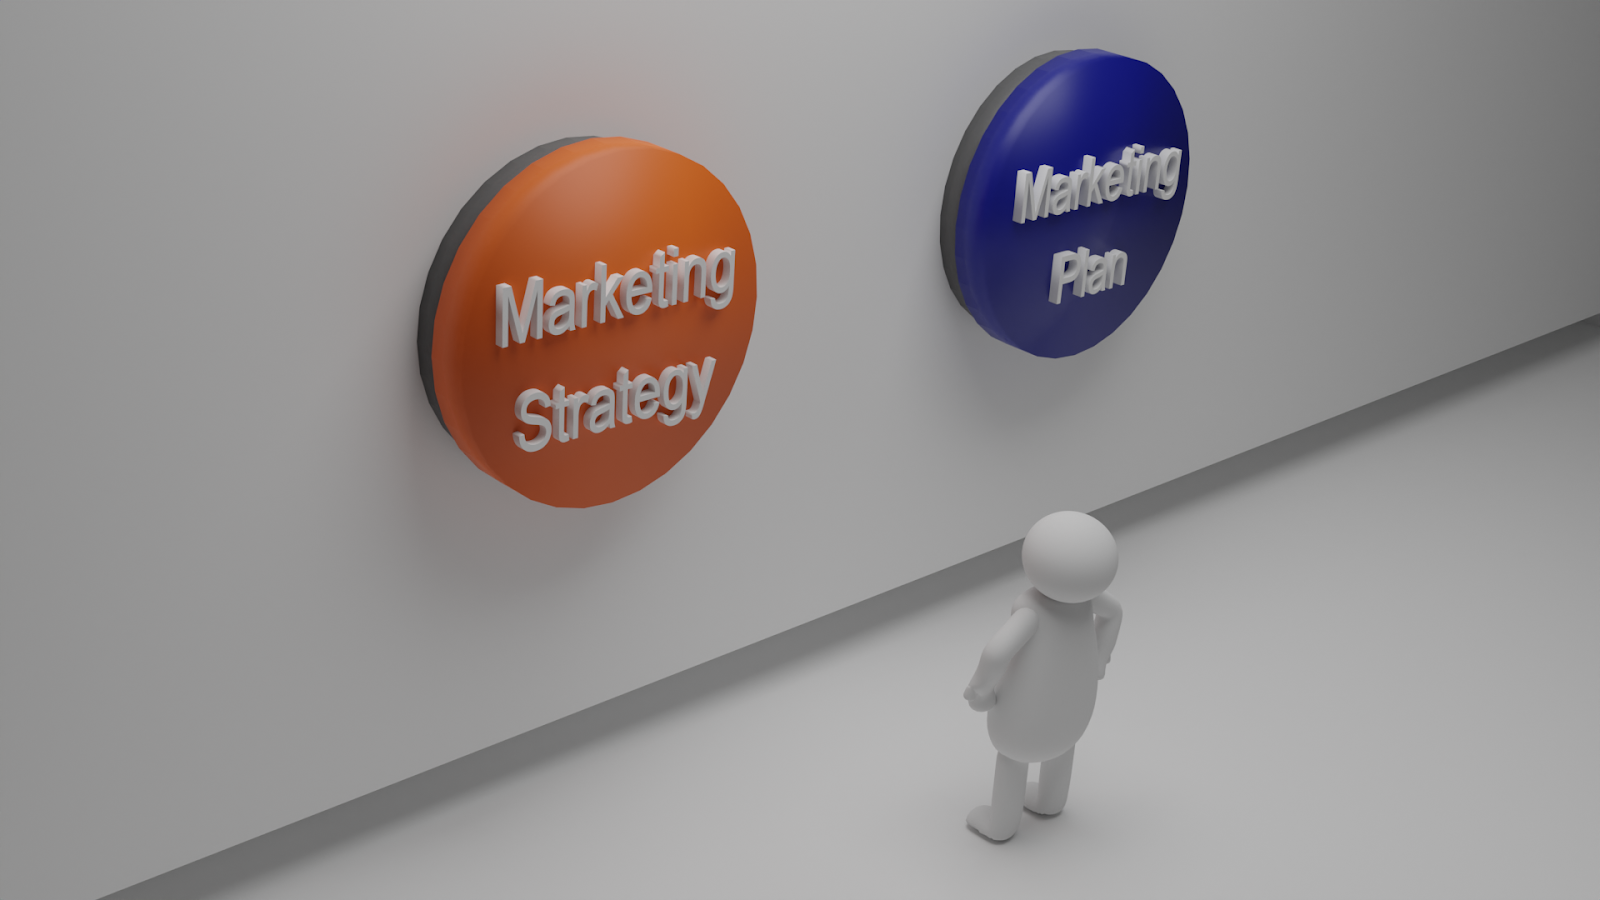 Marketing strategy is not the same as marketing plan. Strategy is big picture and plan gets into the who, what where, when and why.